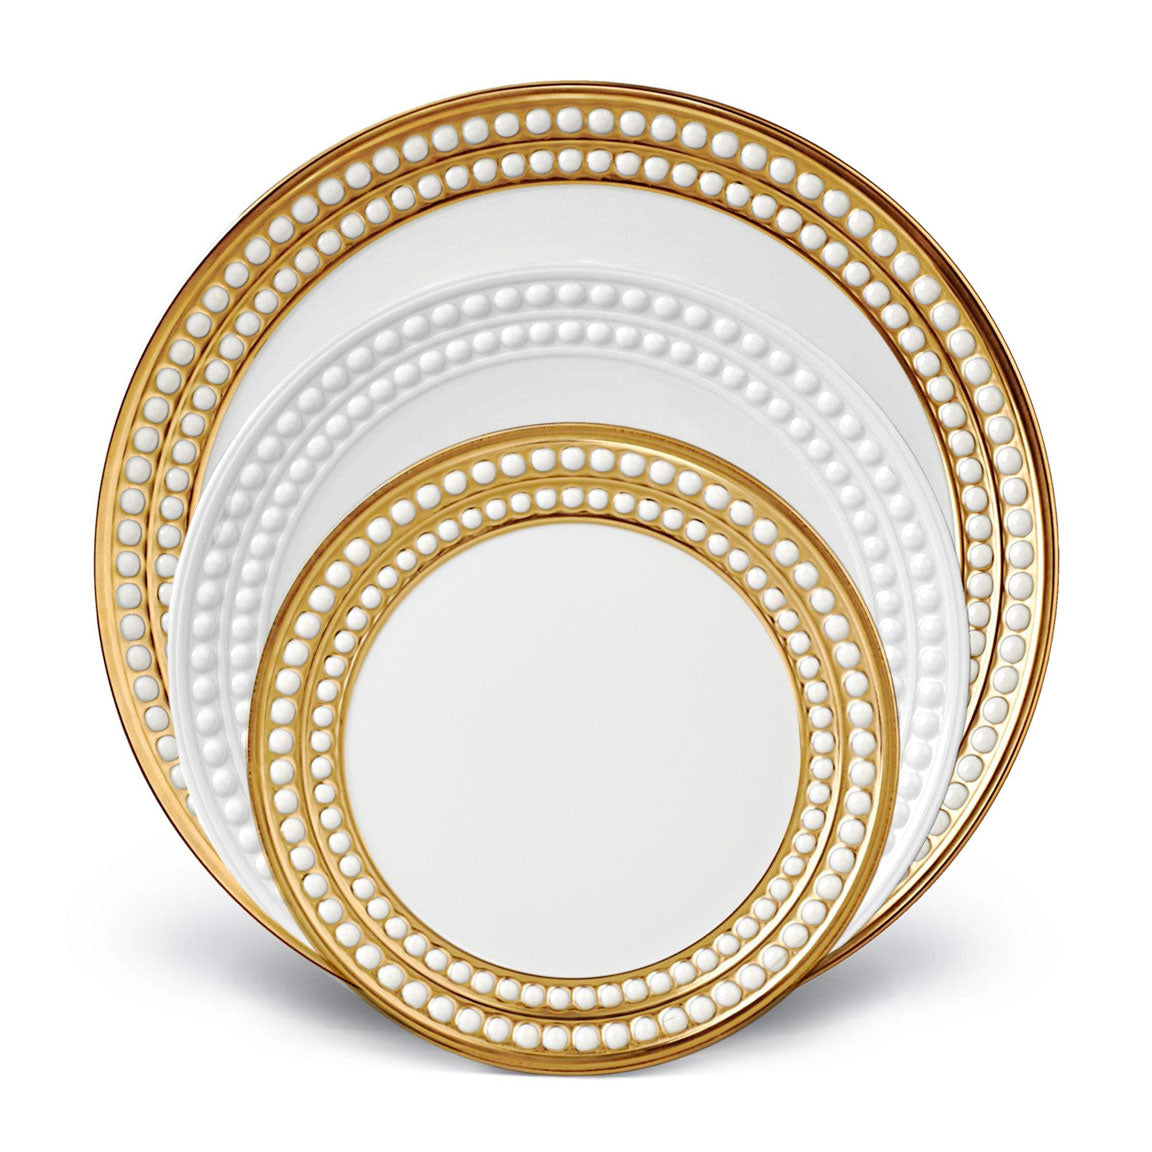 Perlee 3 Piece Gold & White Place Setting - RSVP Style